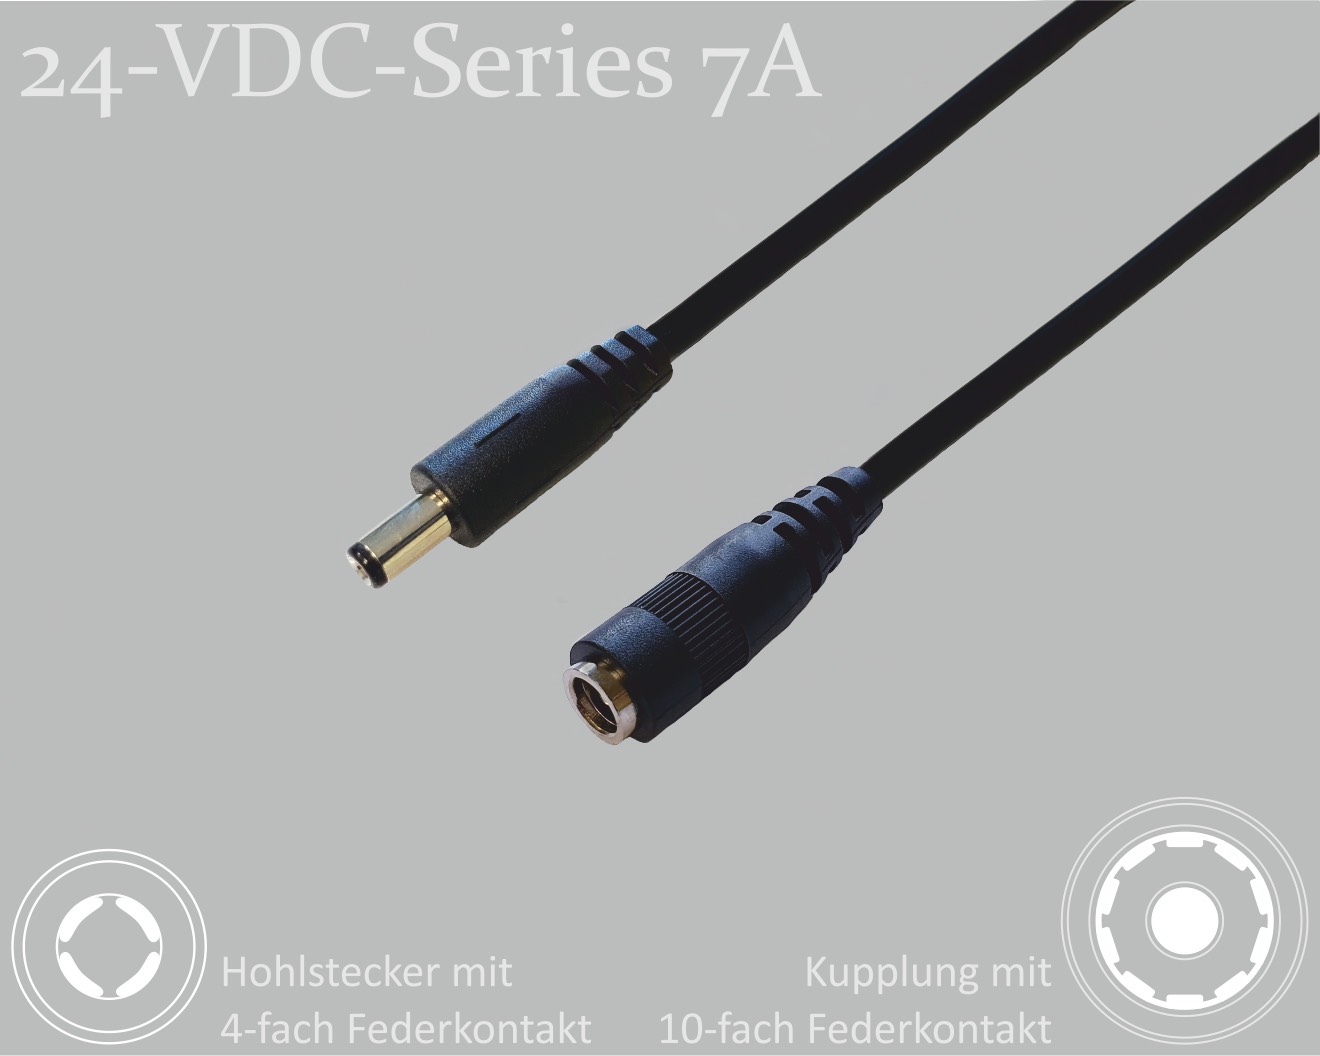 24-VDC-Series 7A, DC extension cable, DC plug with 4-spring contact 2.1x5.5x9.5mm to DC coupling with 10-spring contact 2.1x5.5mm, round cable 2x0.50mm², black, 2m